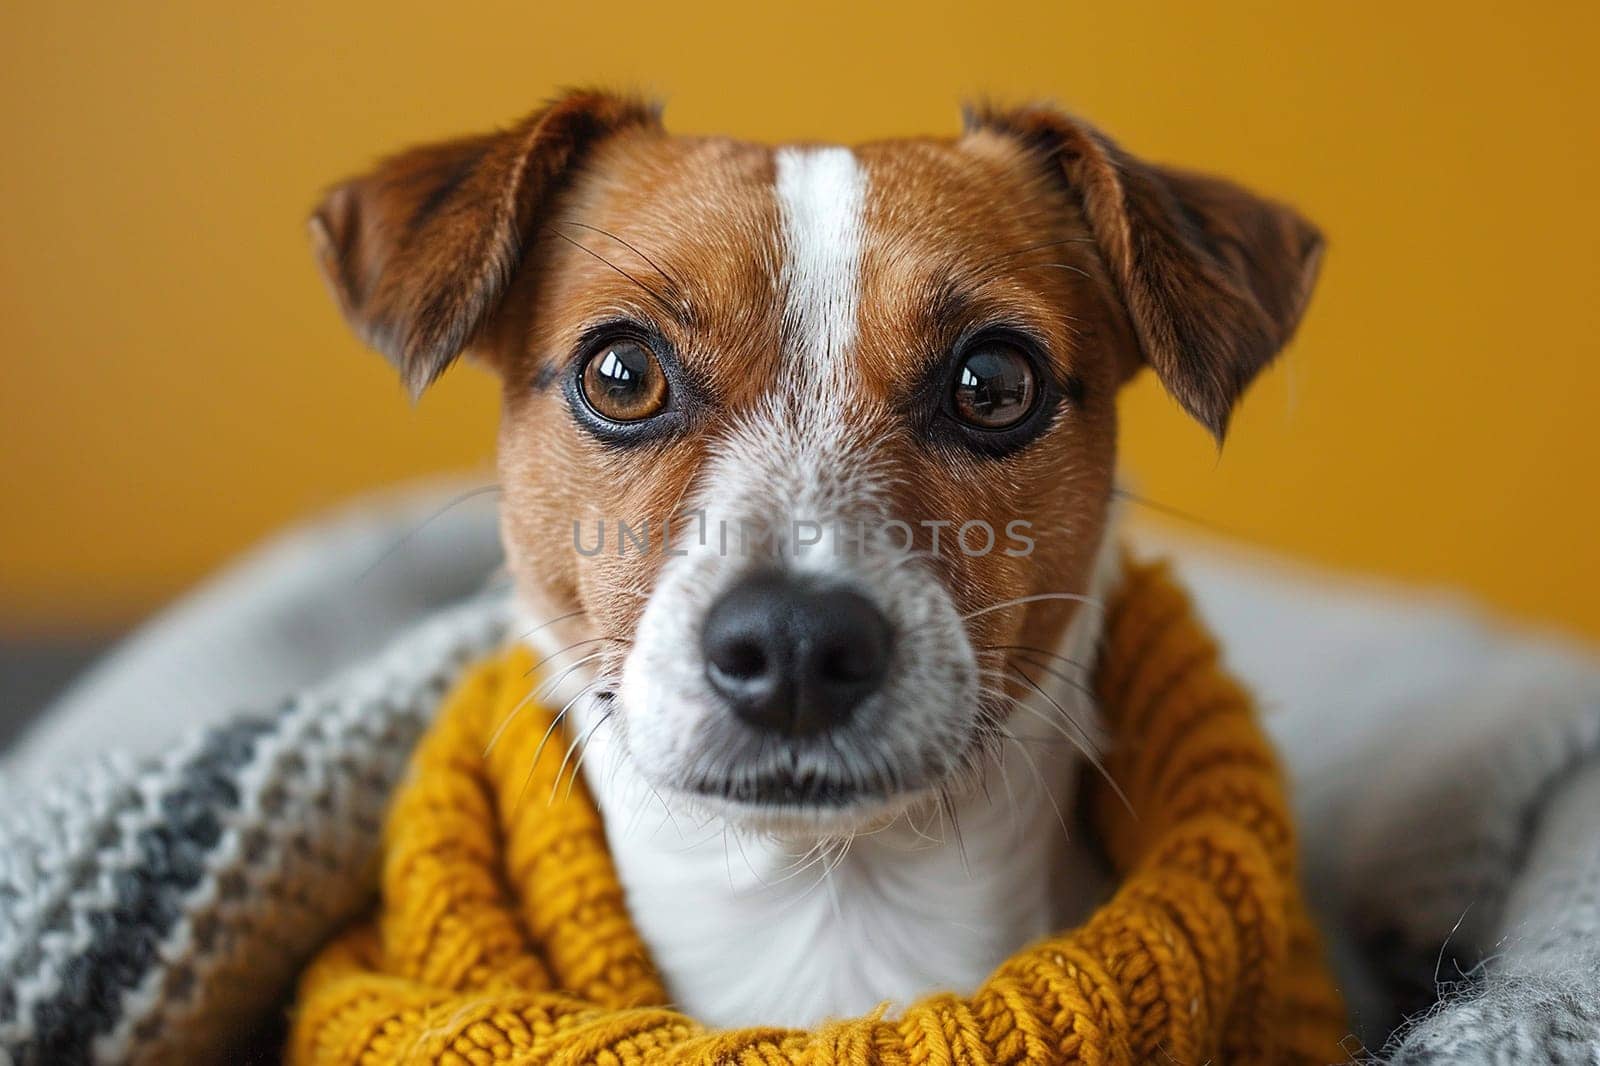 A Jack Russell dog wearing a knitted scarf looks at the camera on a yellow background. Generated by artificial intelligence by Vovmar